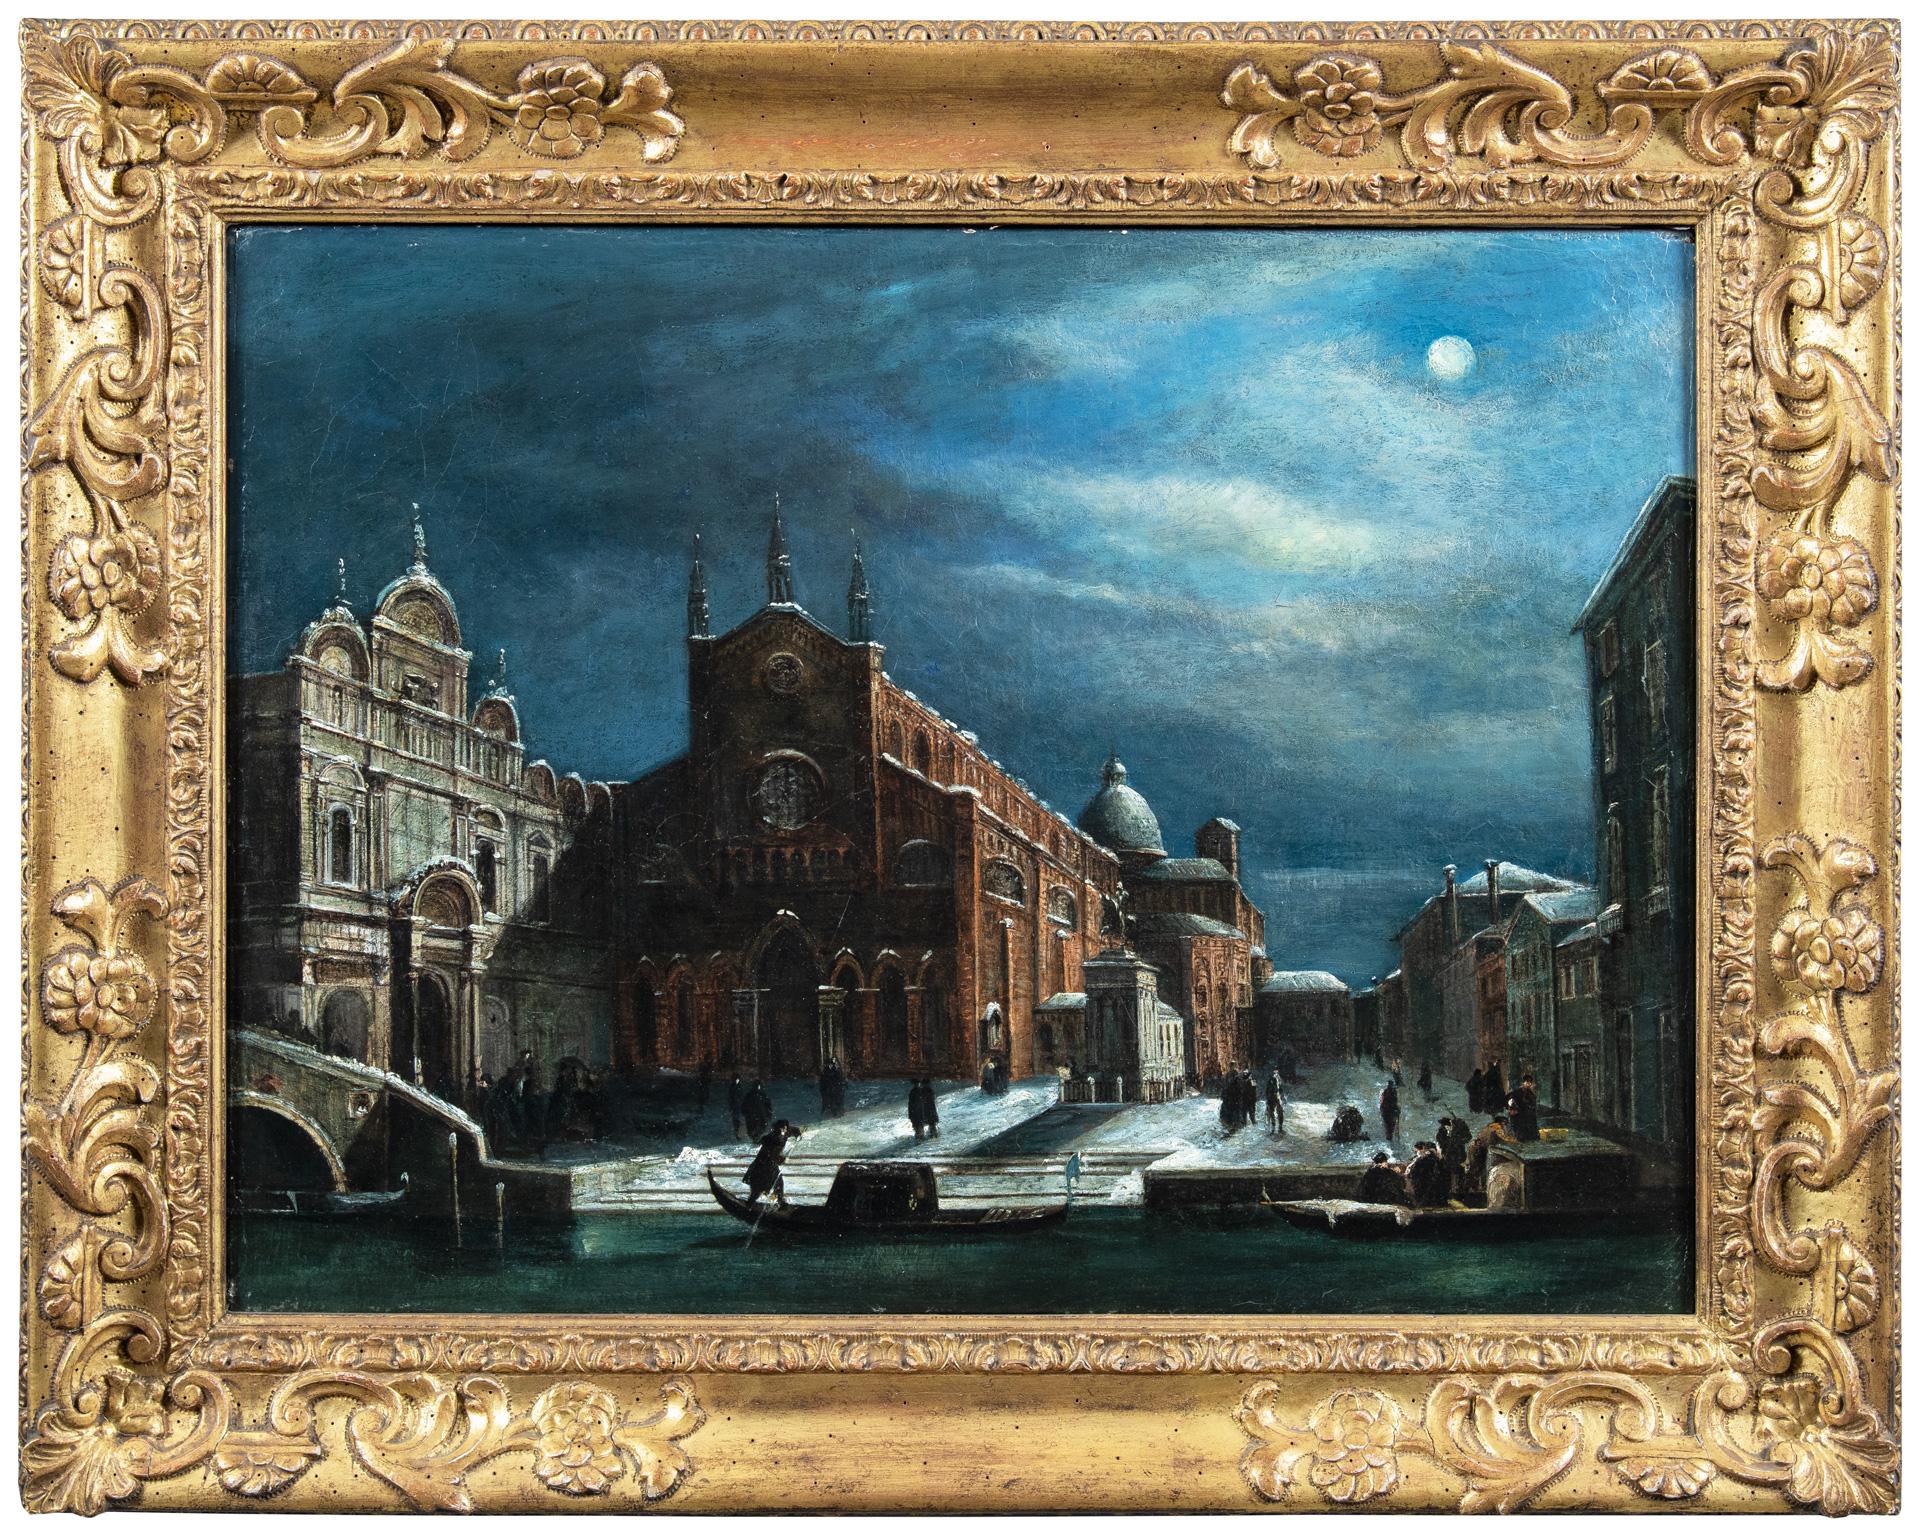 18th-19th century Venetian view painting - Venice Snow Moon - Oil on canvas